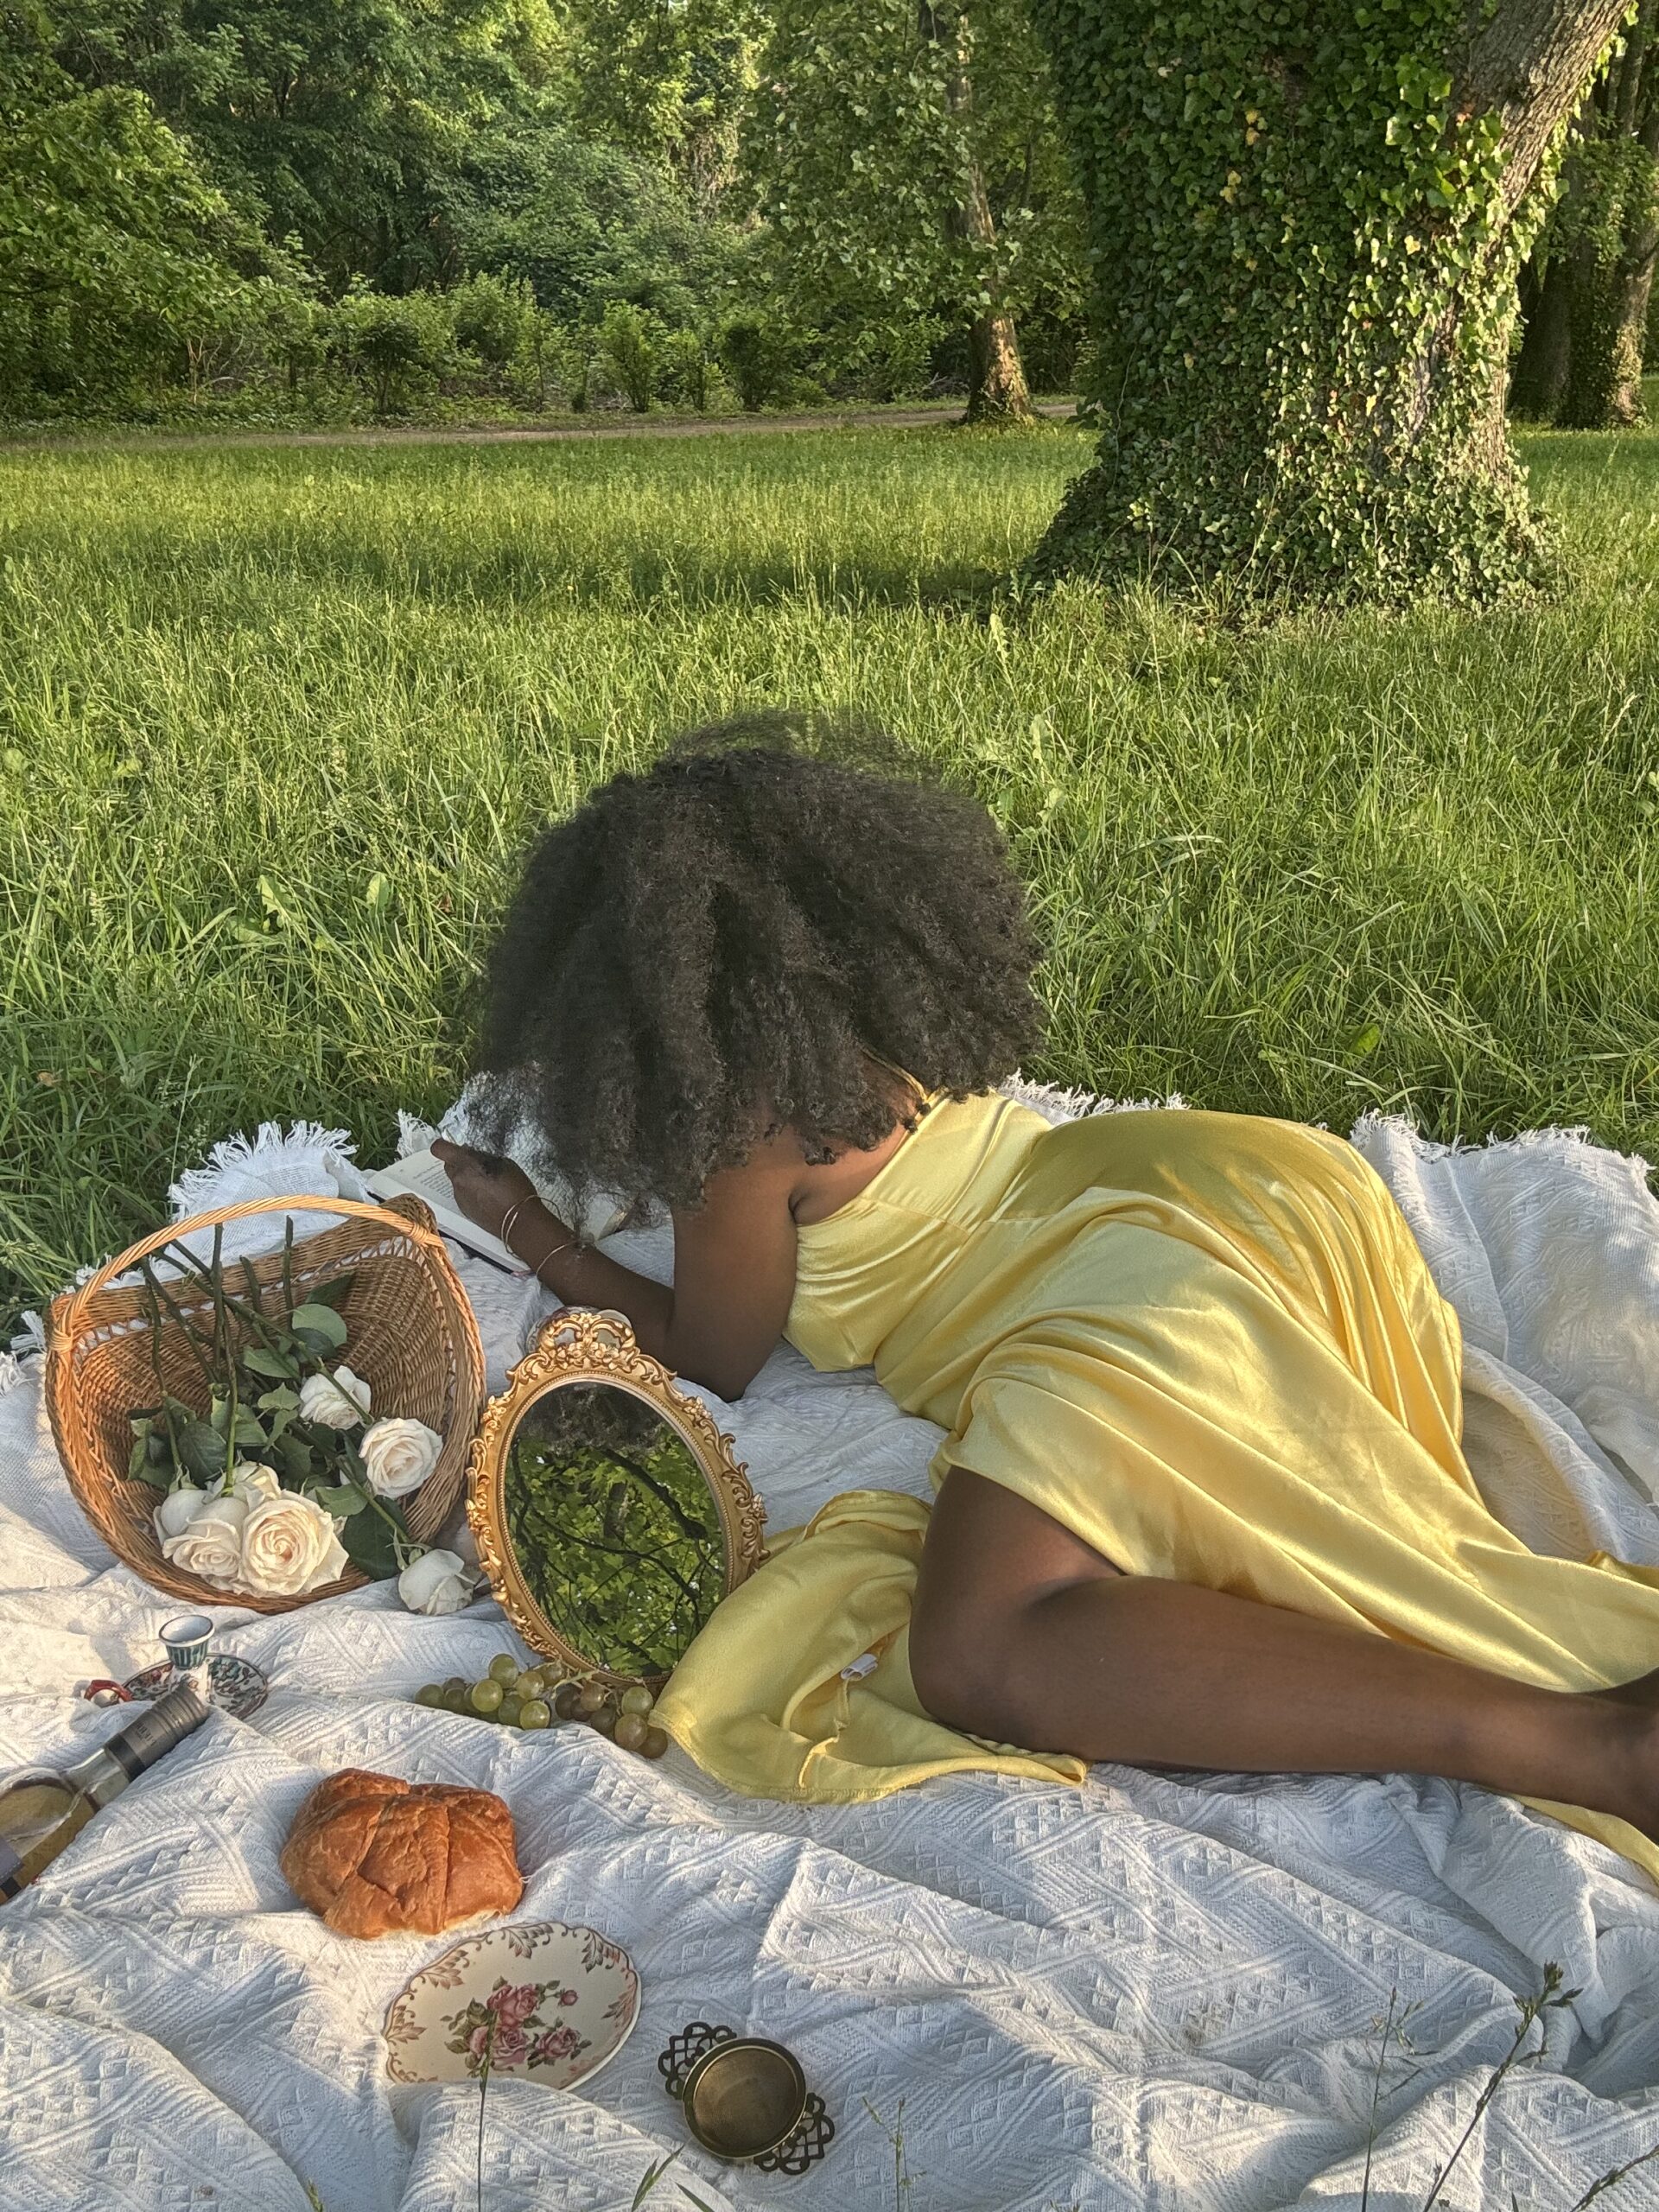 black woman with large afro in yellow dress laying on white sheet next to a tree. On sheet are croissants, fruit, flowers, flower basket, and gold antique looking mirror.